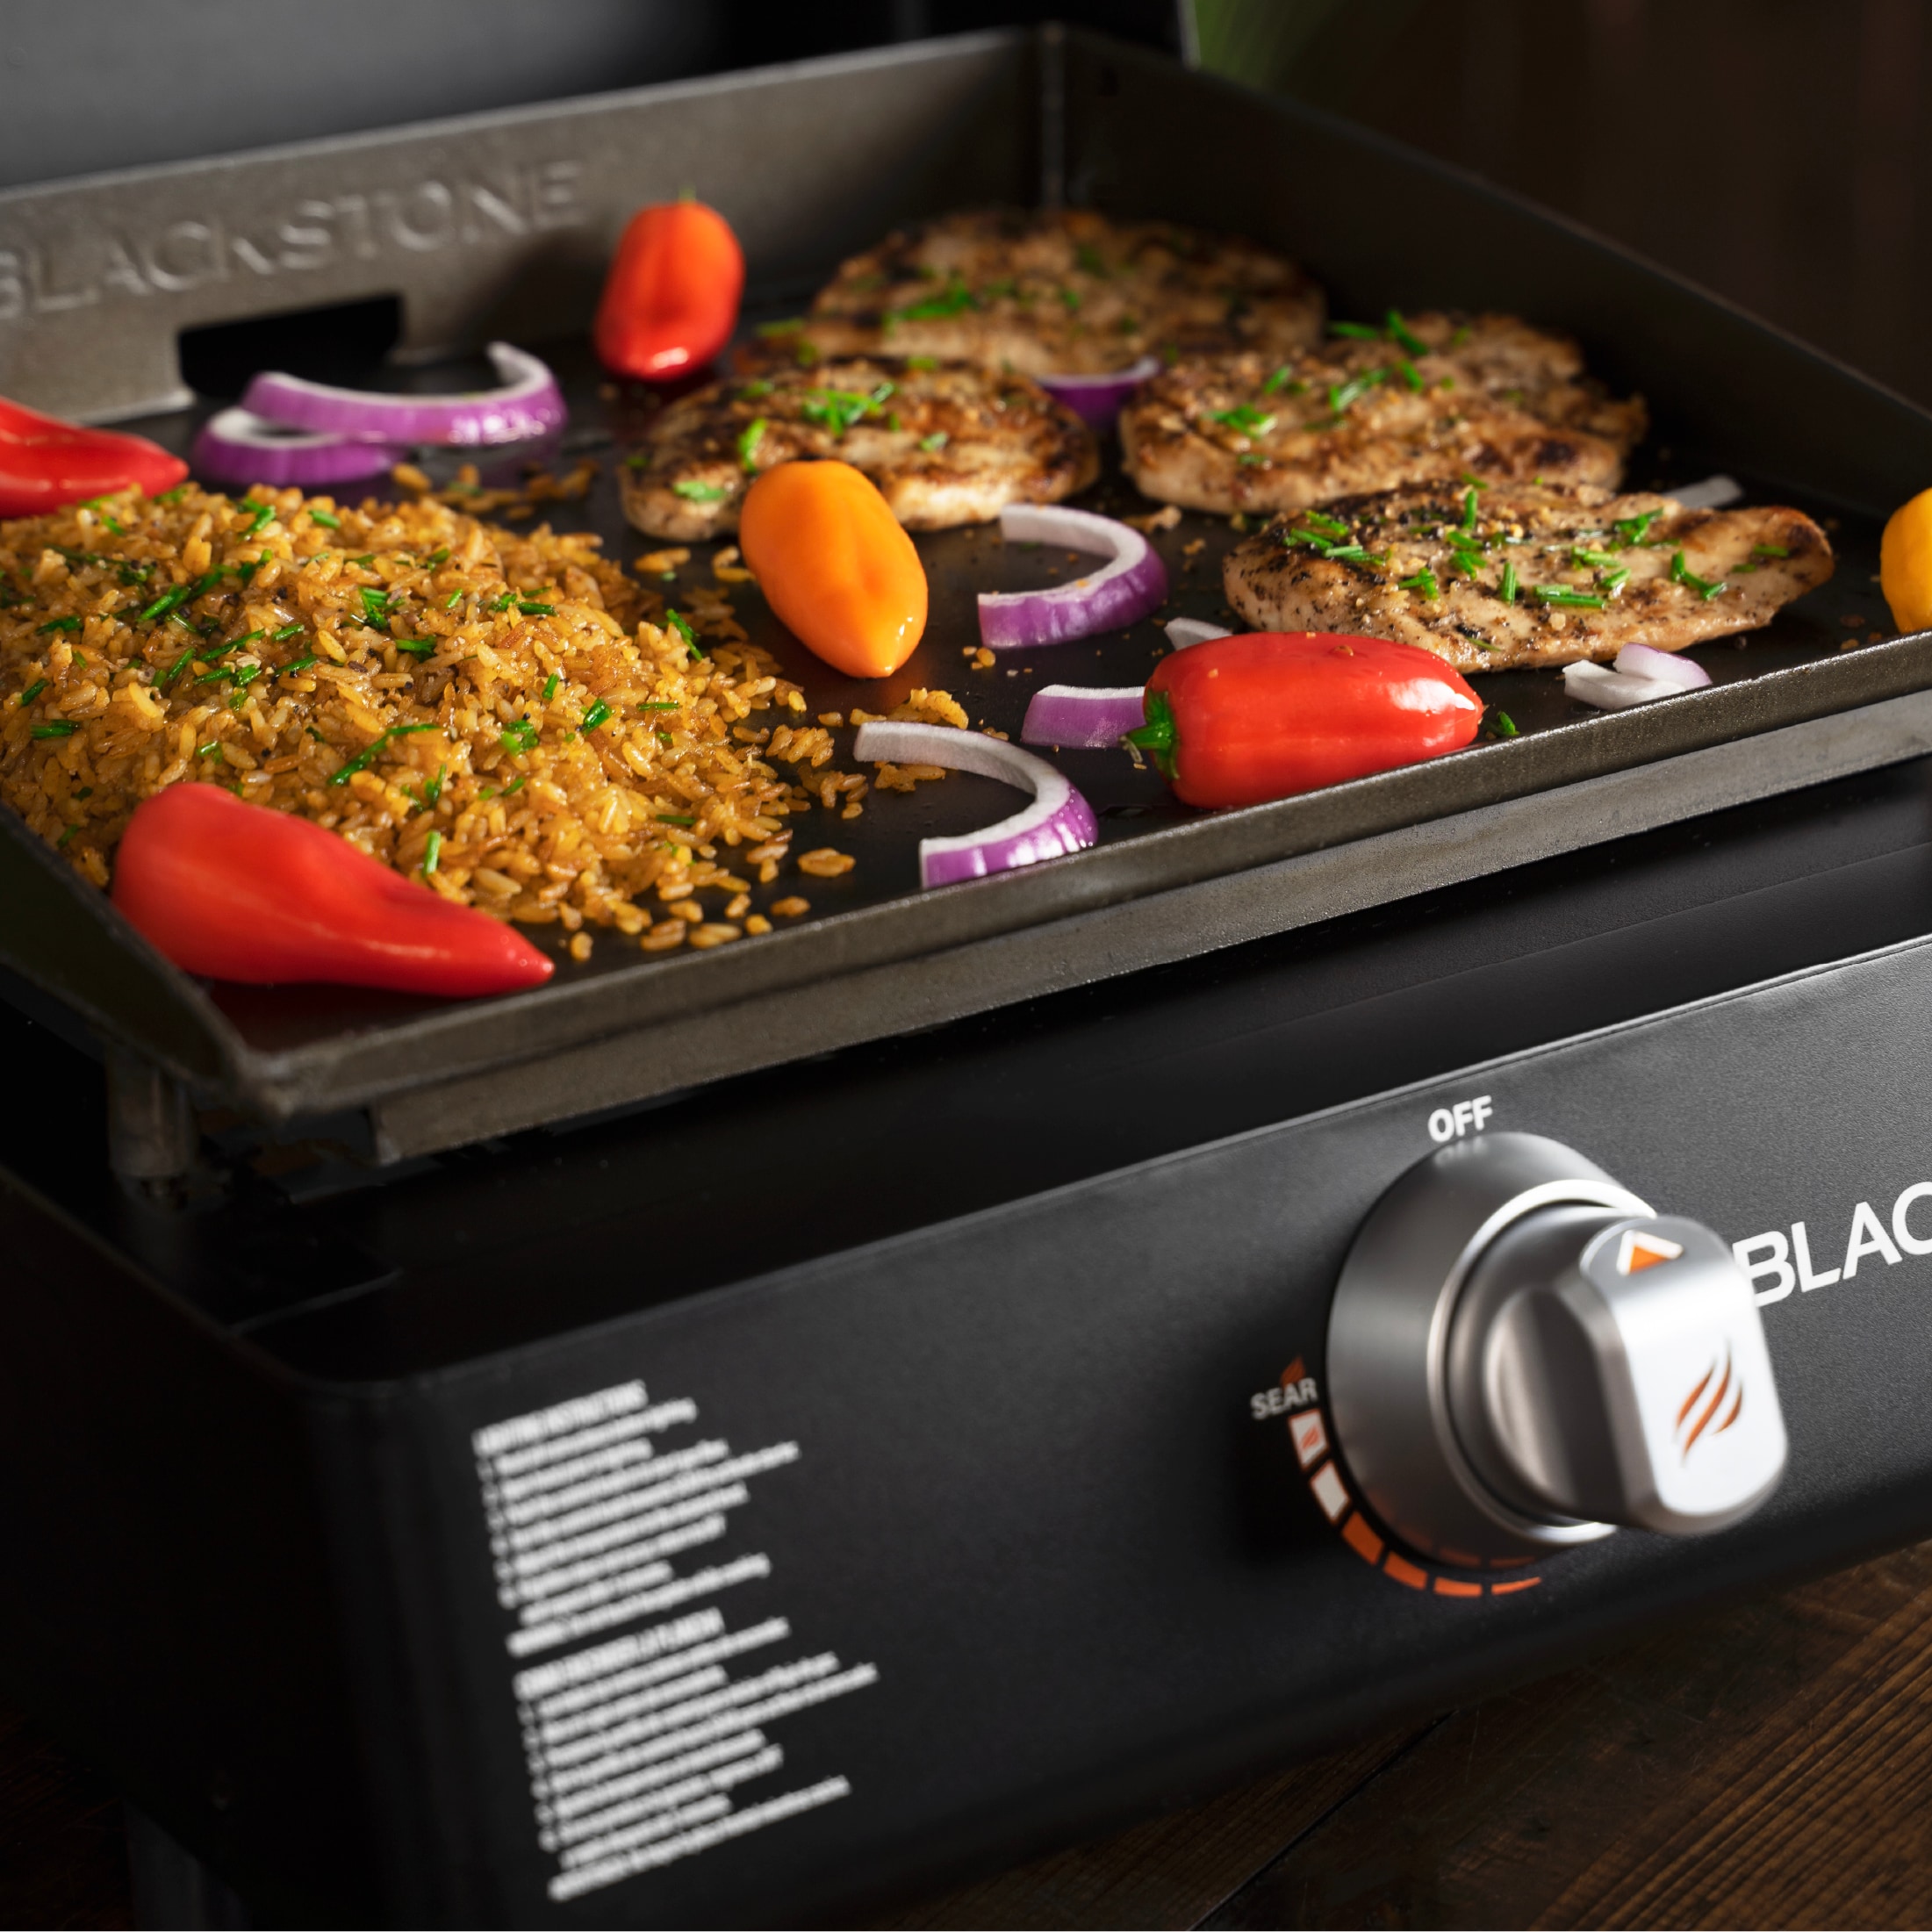 Blackstone Griddle Original 17-Inch 1-Burner Tabletop Propane Gas  Commercial Style Flat Top Griddle With Hood - 1814